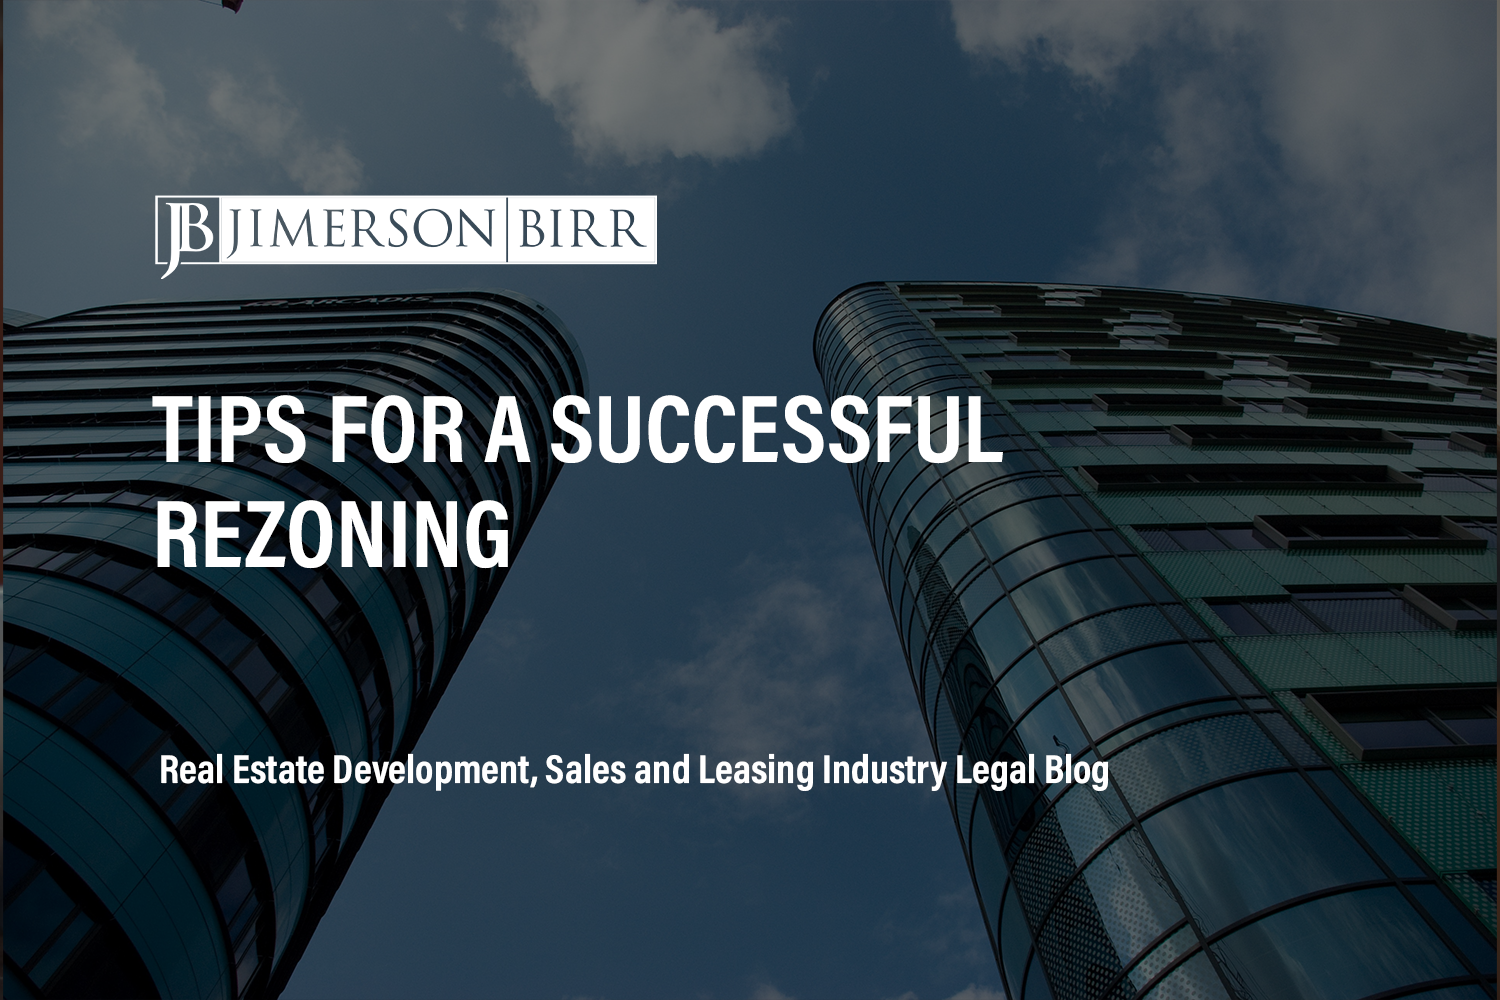 Tips for a Successful Rezoning